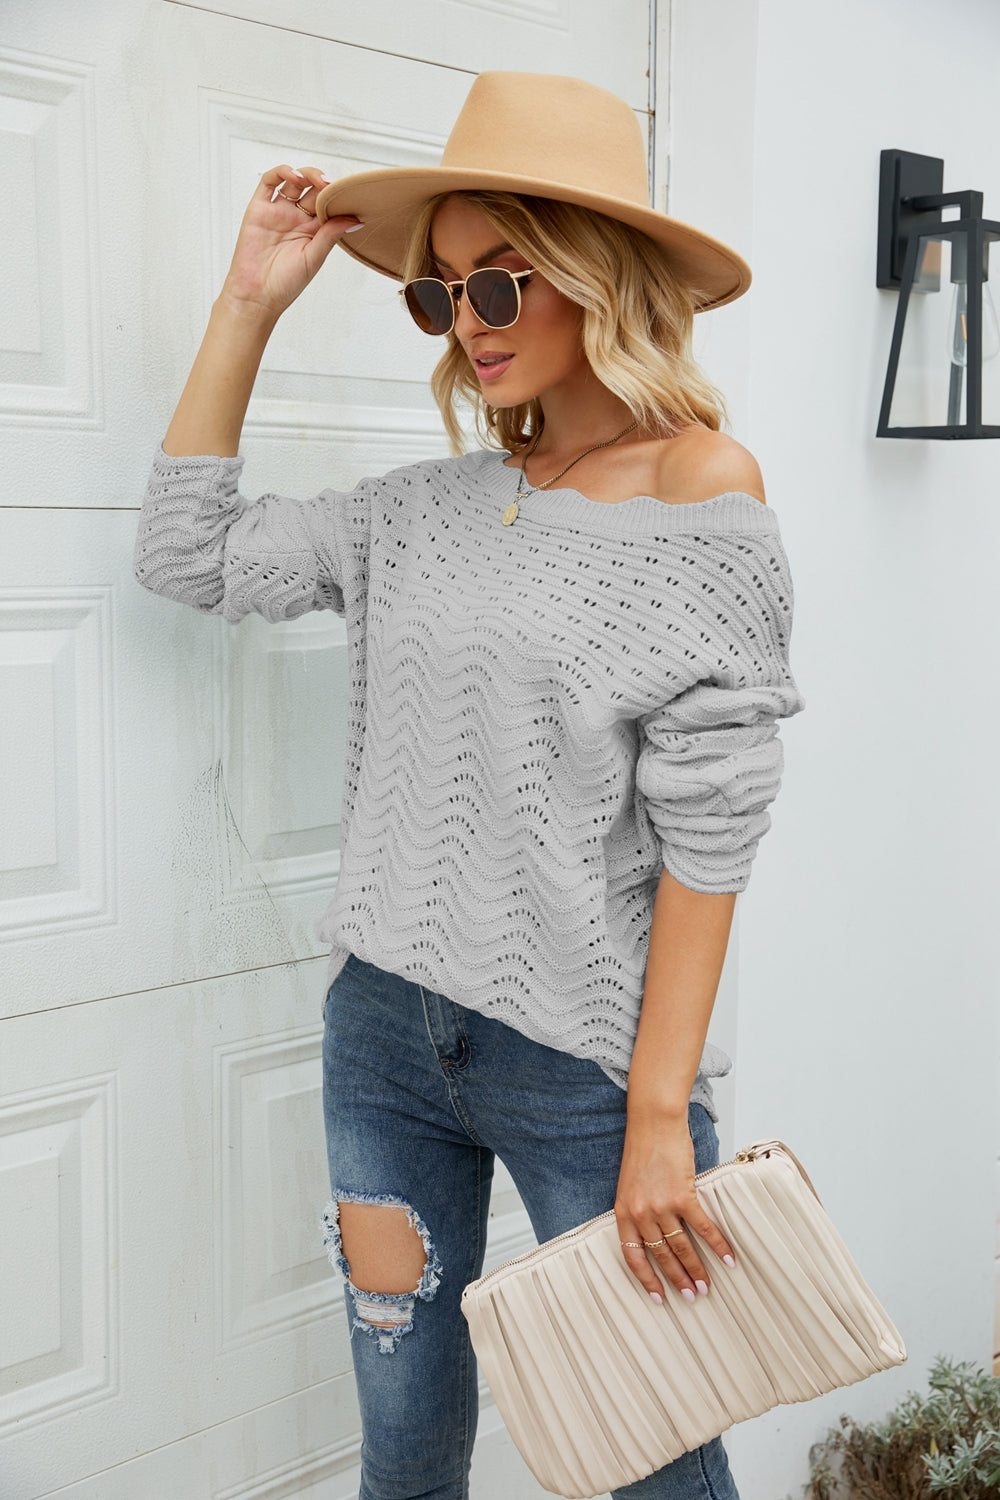 Scalloped Boat Neck Openwork Tunic Sweater Print on any thing USA/STOD clothes